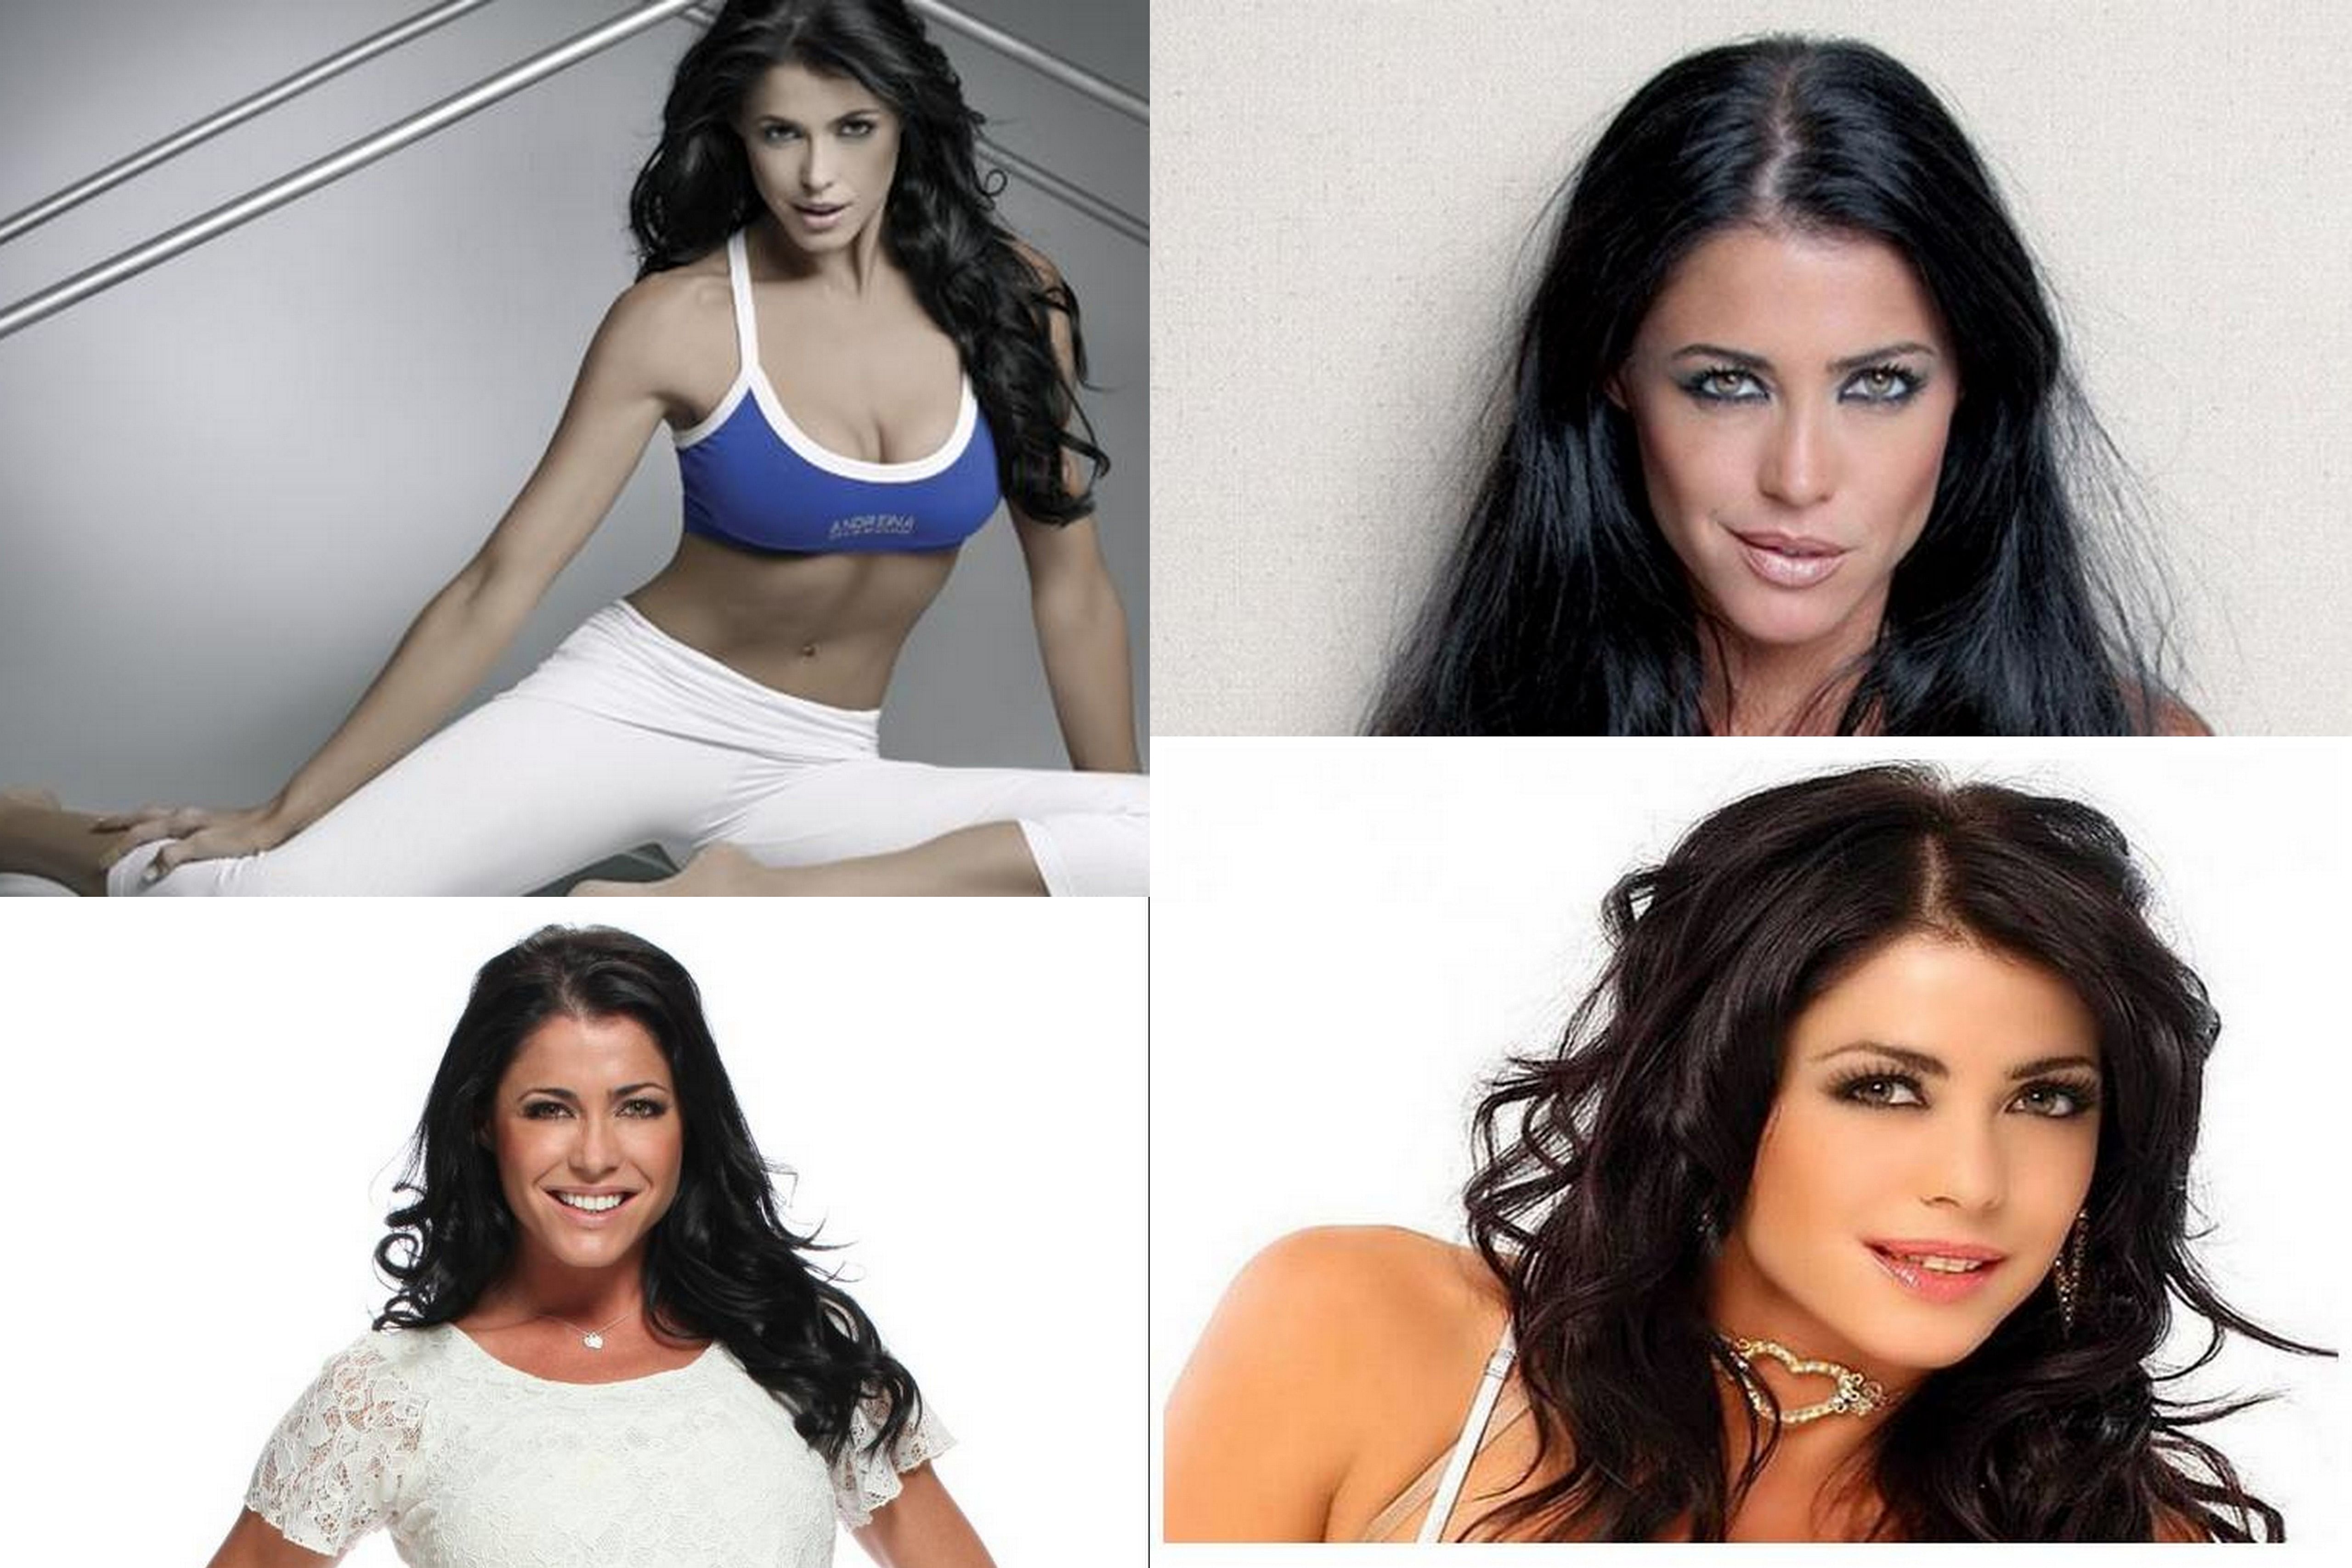 The top 10 hottest female football presenters - Slide 10 of 105120 x 3413